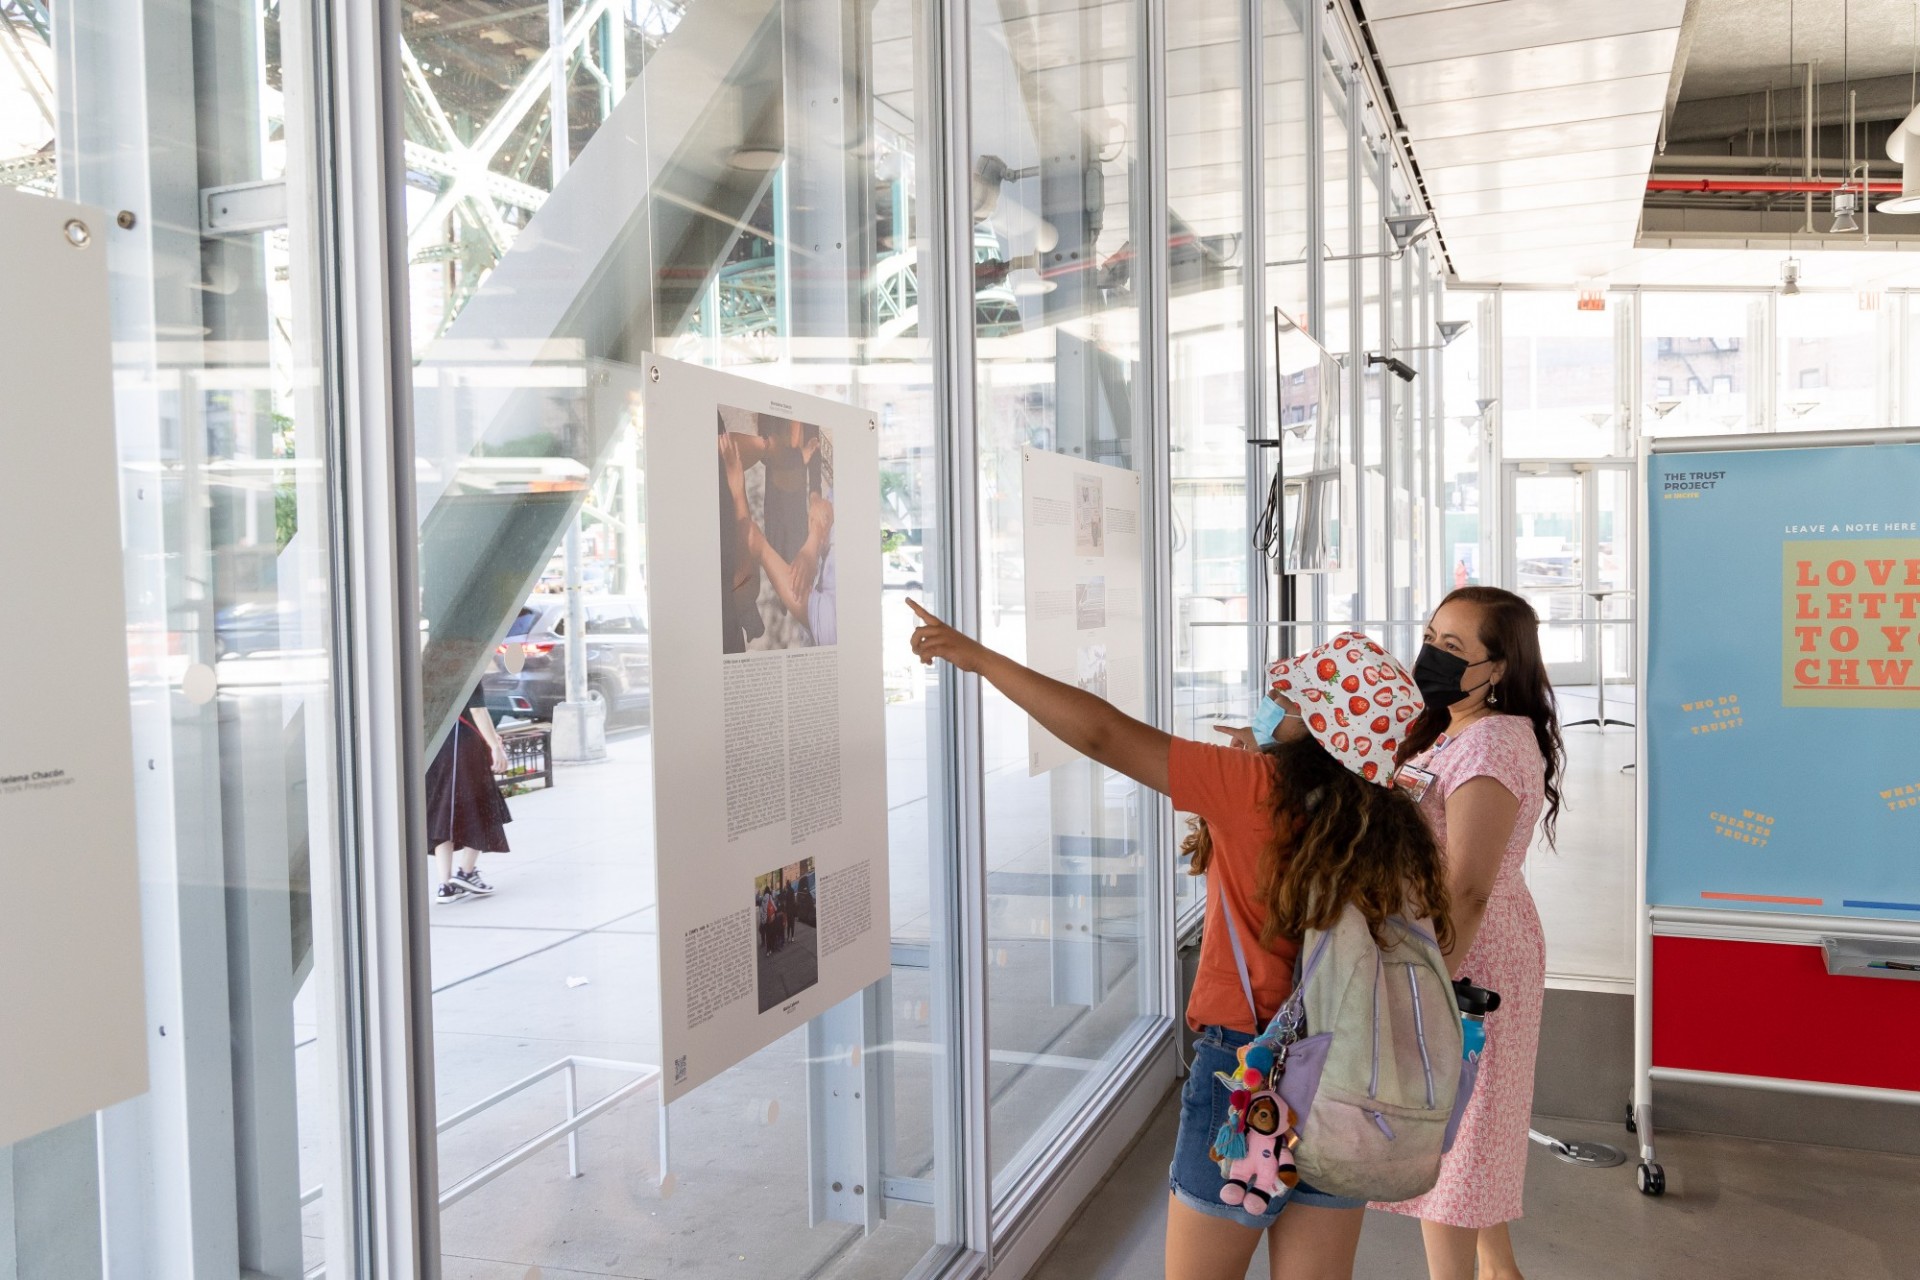 Visitors study a poster hanging in The Forum's atrium window as part of the PhotoVoice exhibit